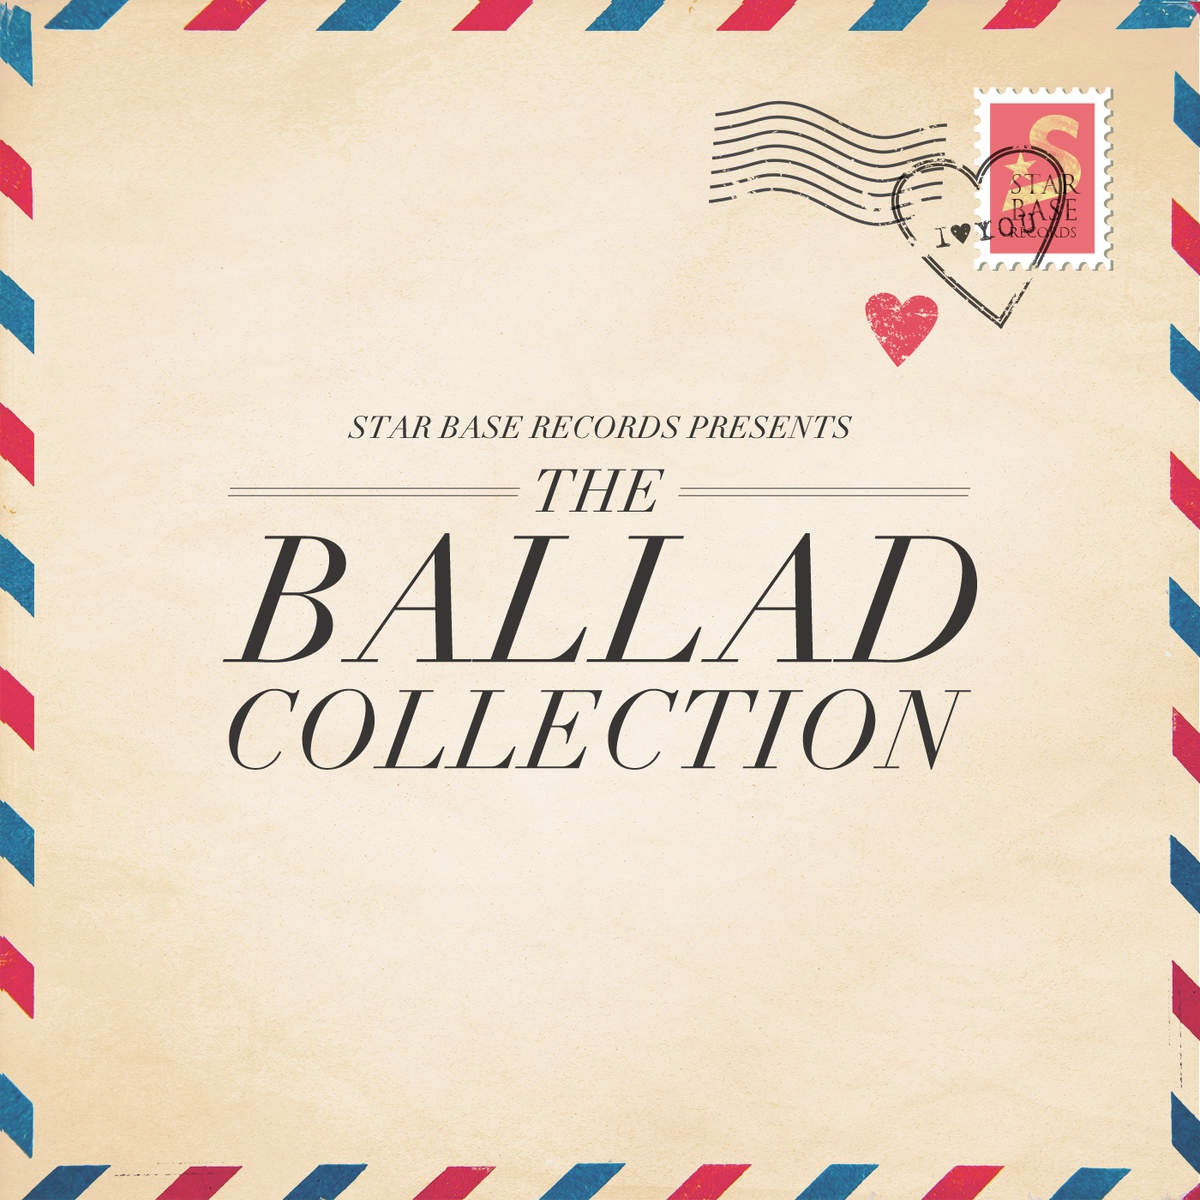 Star Base Records Presents the Ballad Collection